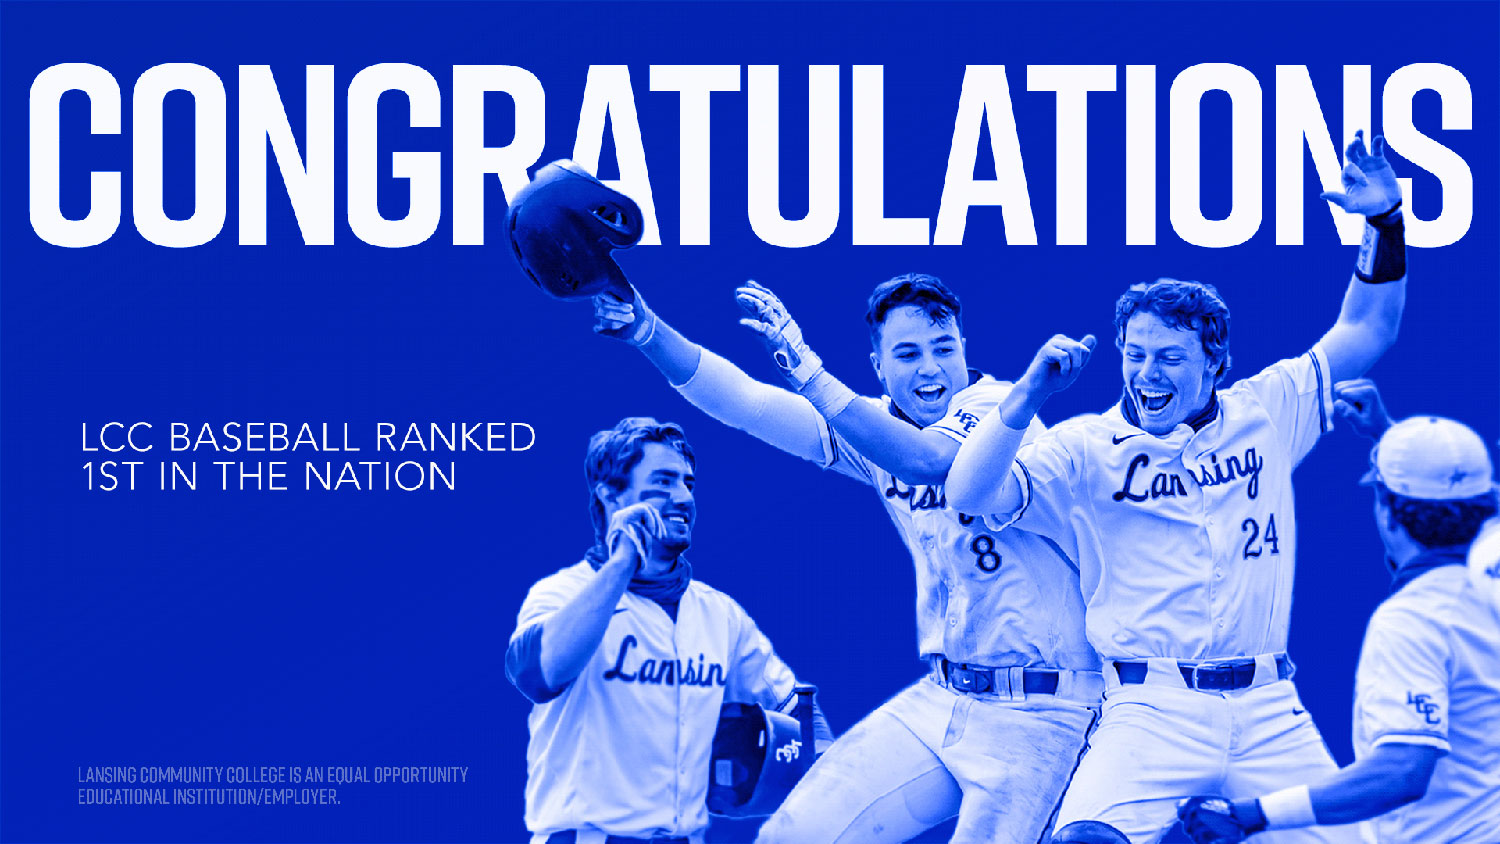 Congratulations - lcc baseball ranked first in the nation 